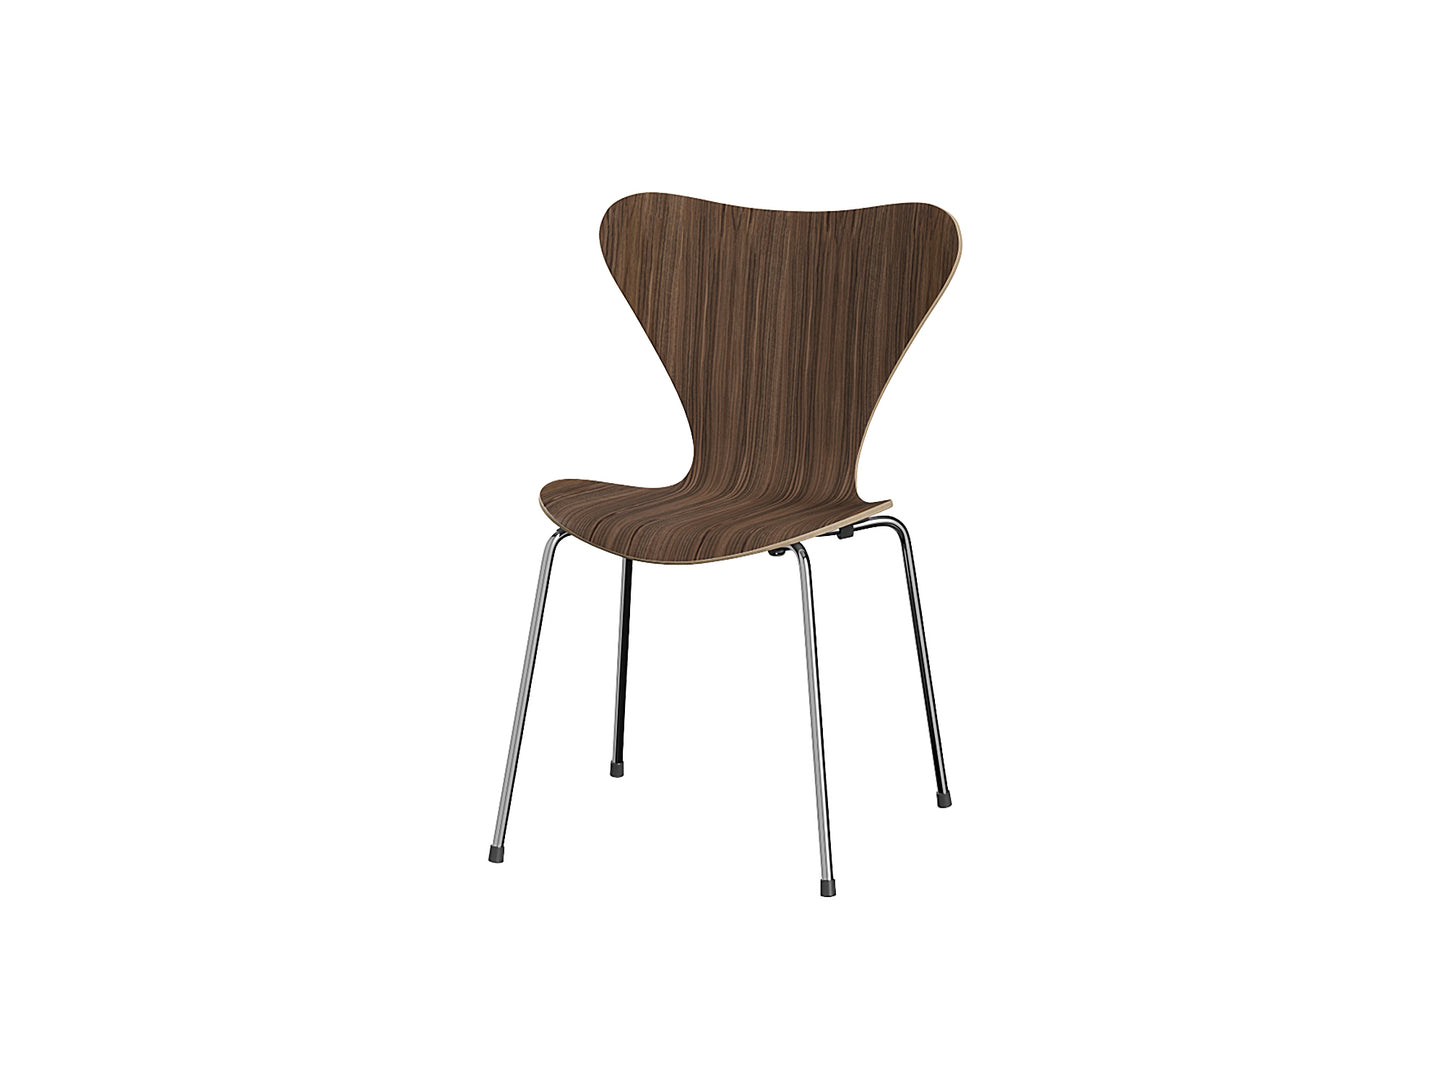 Series 7 Dining Chair (Clear Lacquered Wood) by Fritz Hanse - Walnut / Chromed Steel